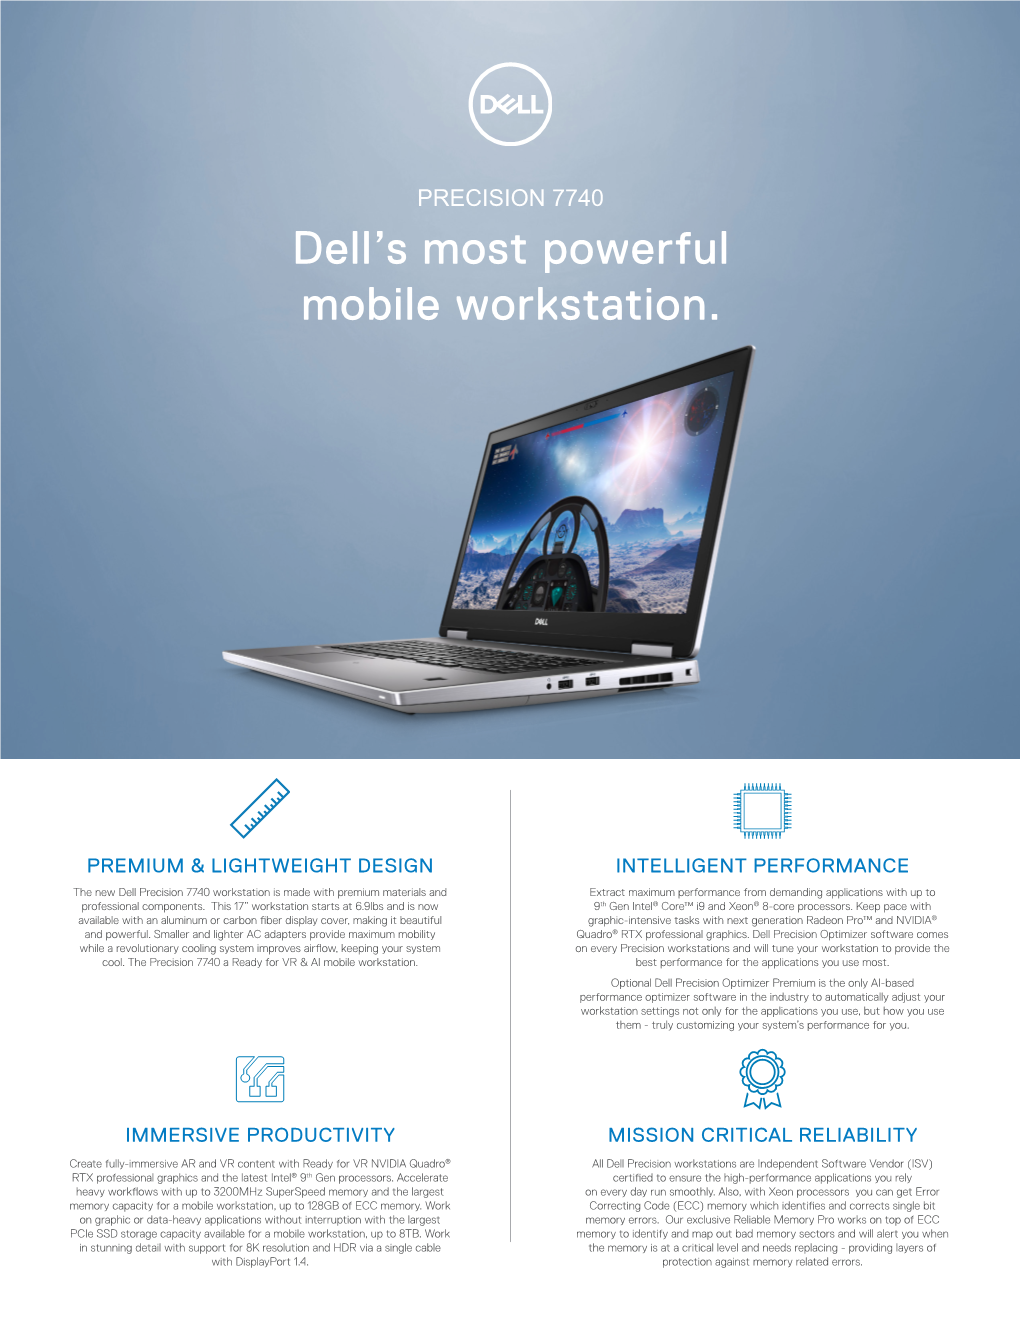 Dell's Most Powerful Mobile Workstation